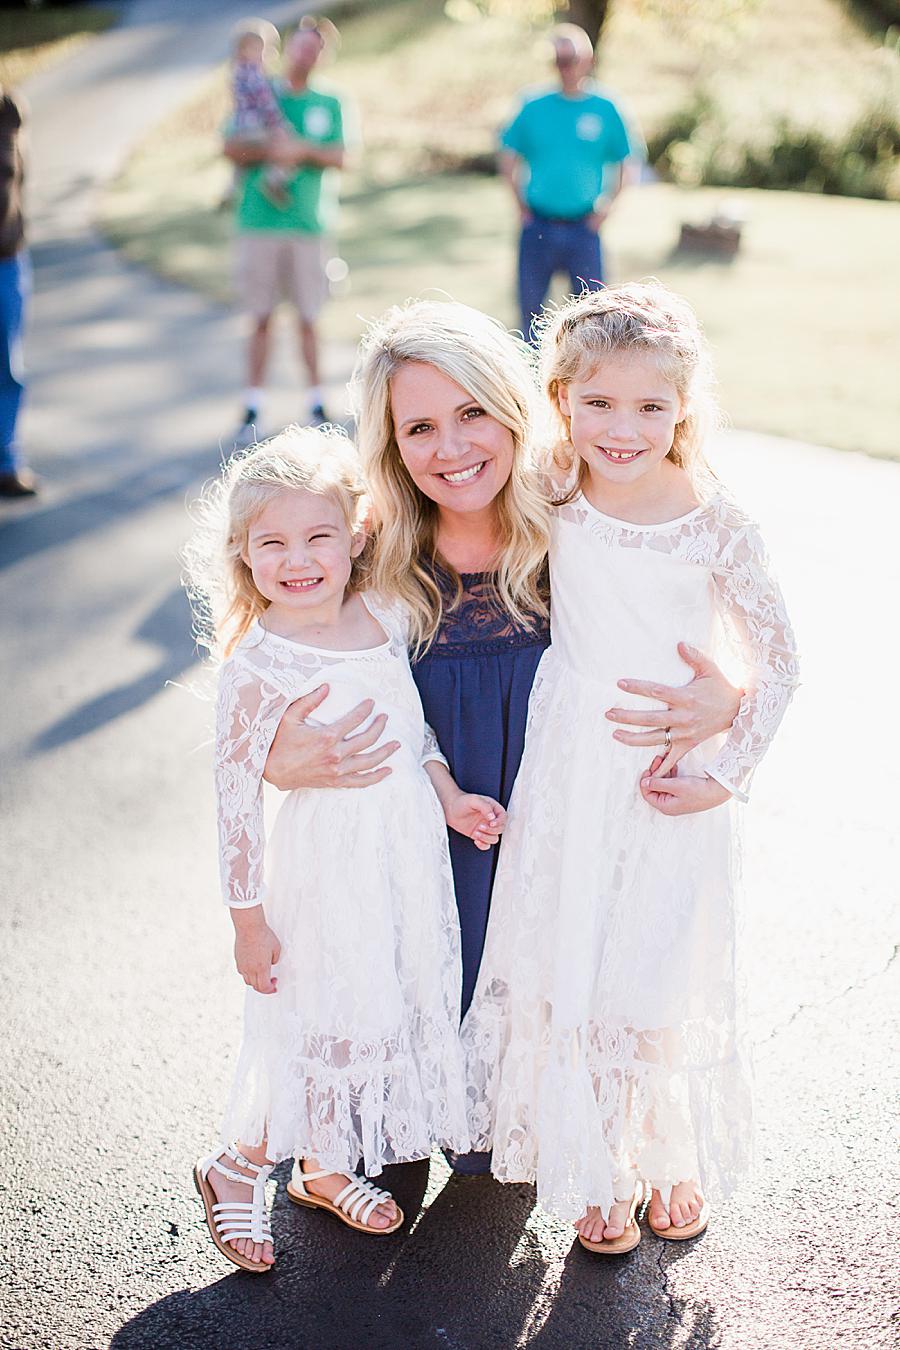 Flower girl dresses by Knoxville Wedding Photographer, Amanda May Photos.